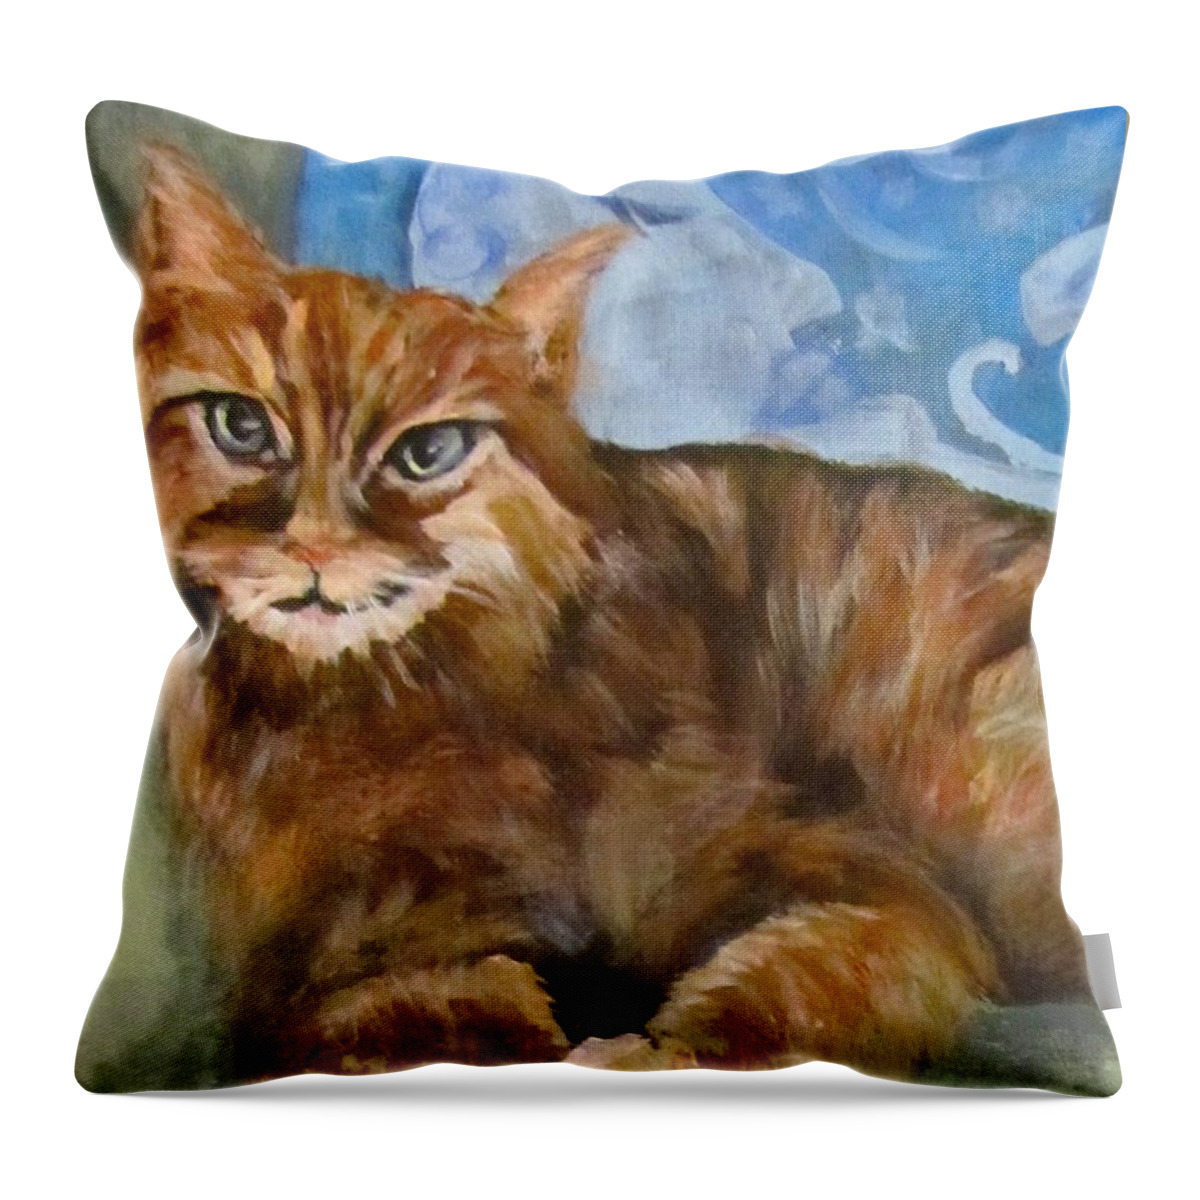 Cat Throw Pillow featuring the painting Hey Diddle Diddle by Barbara O'Toole